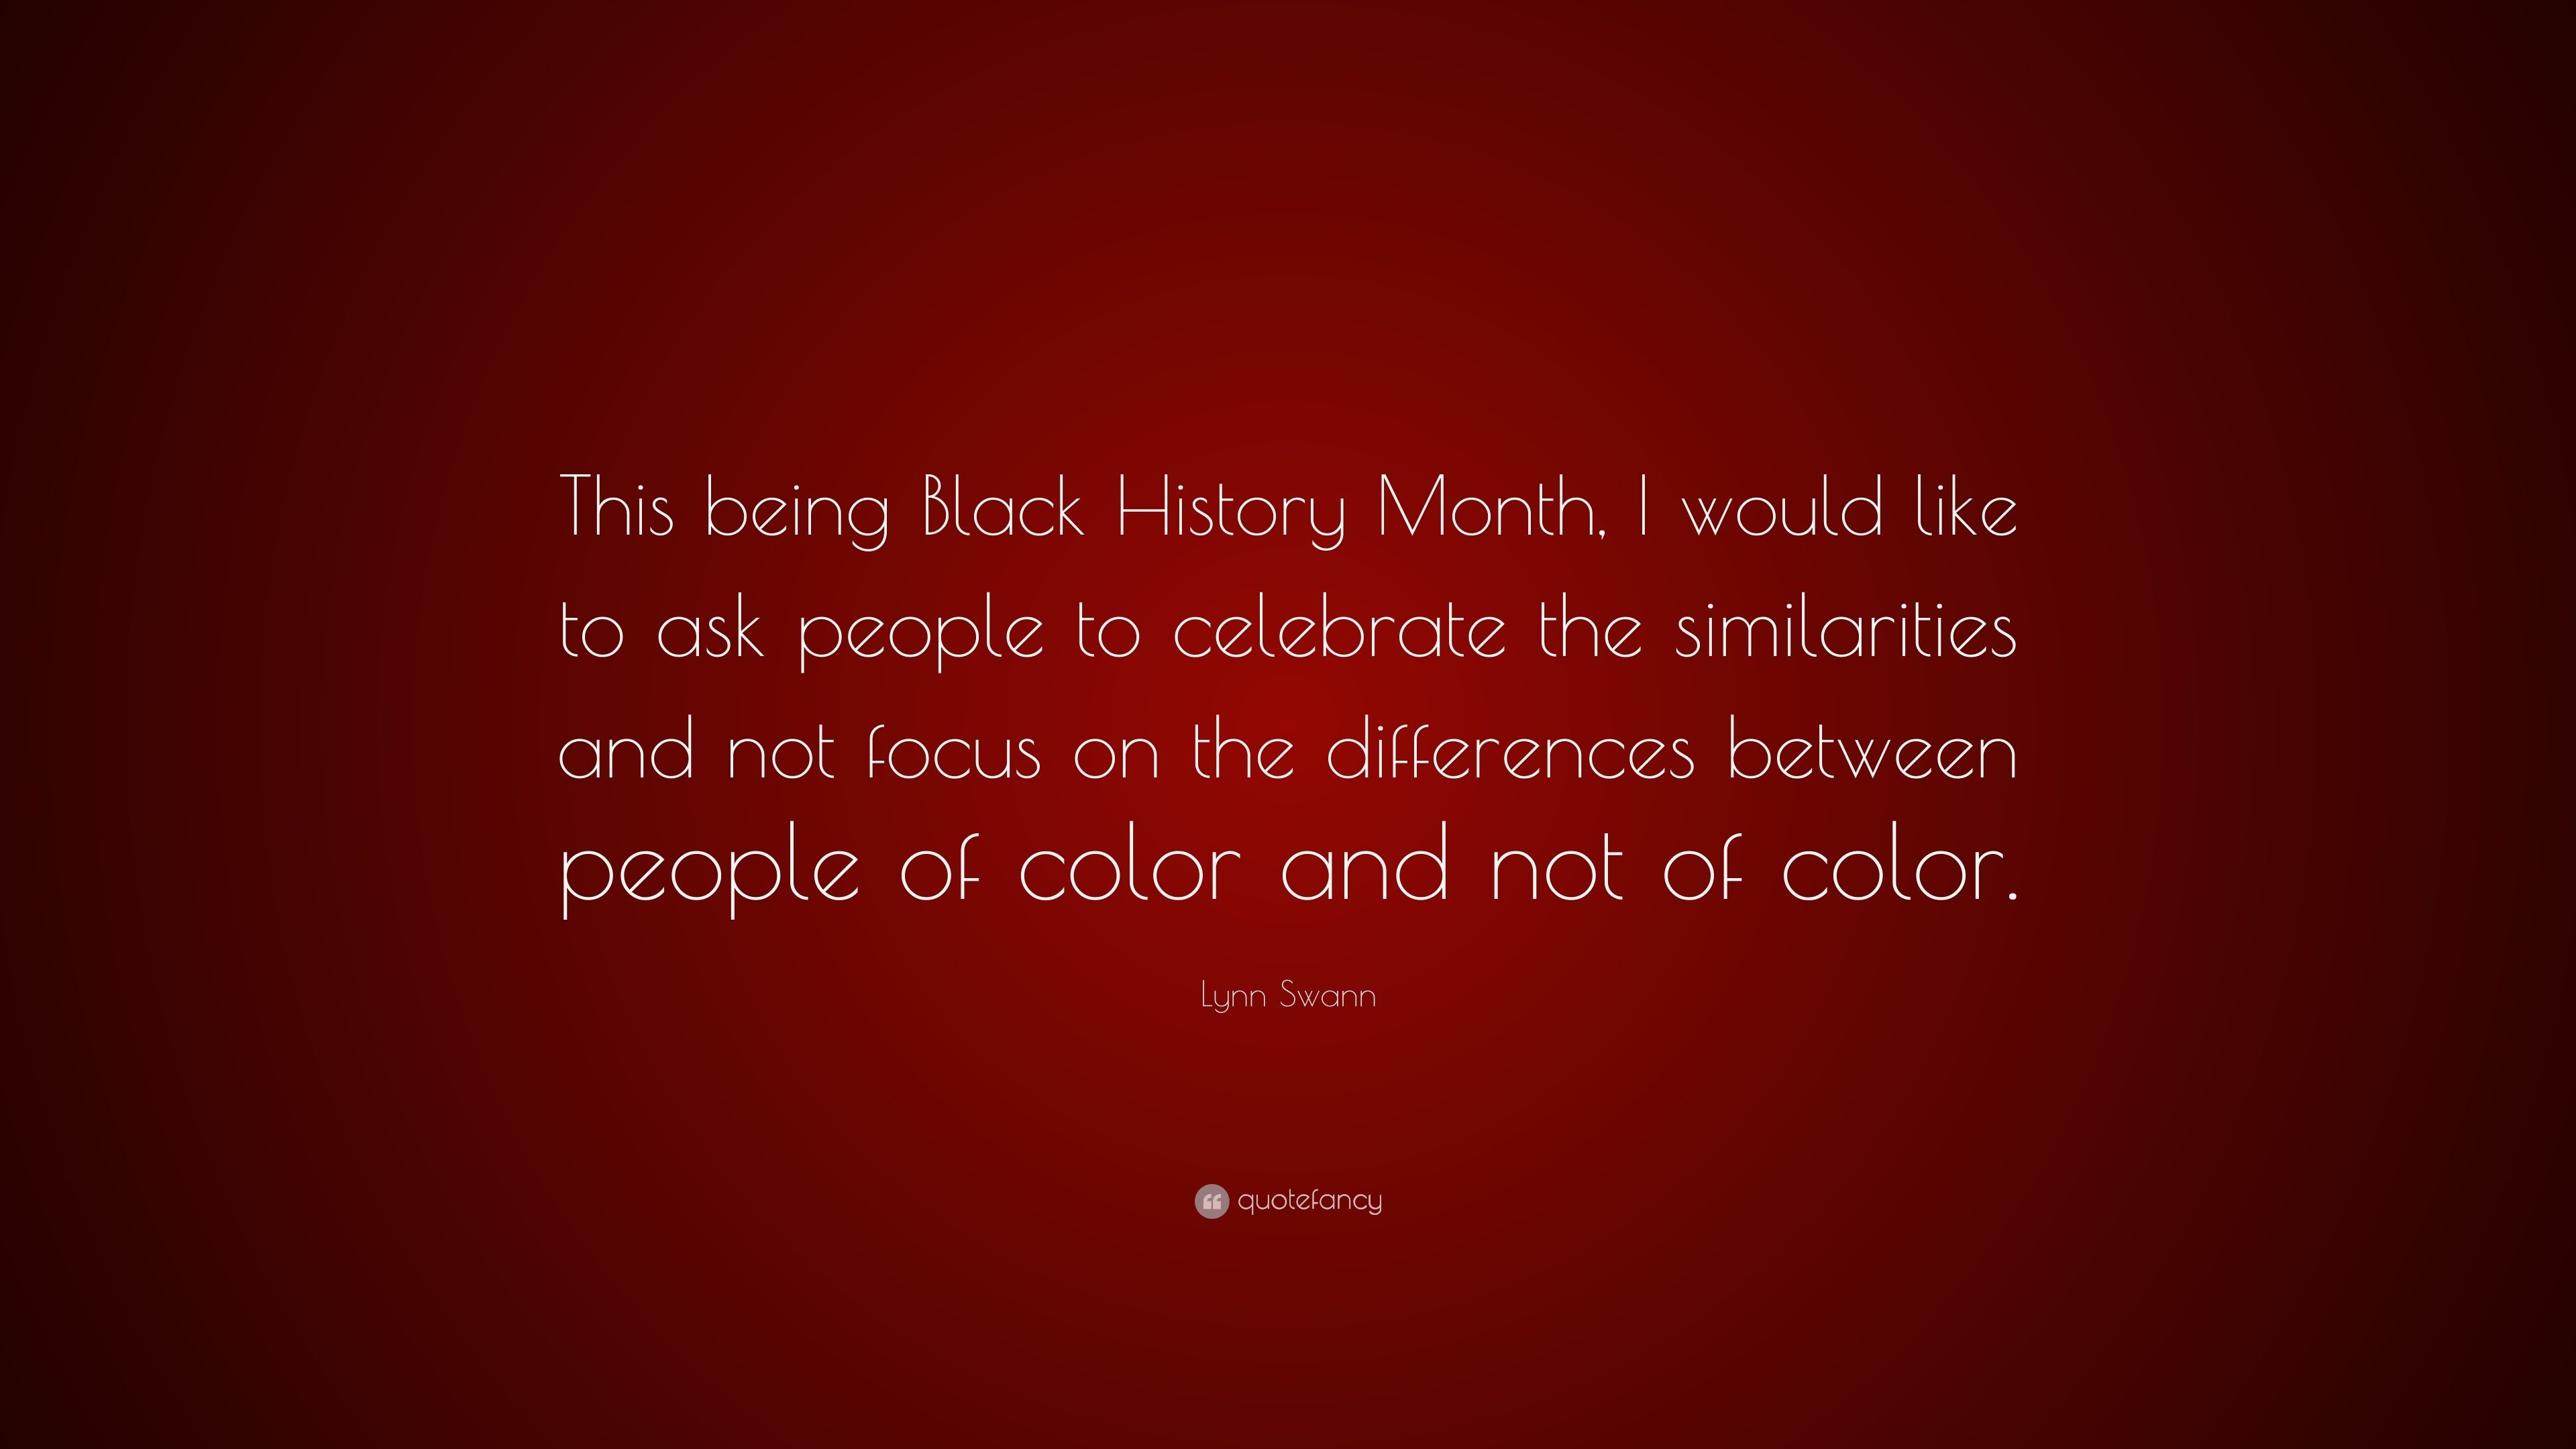 3840x2160 Lynn Swann Quote: “This being Black History Month, I would like to ask